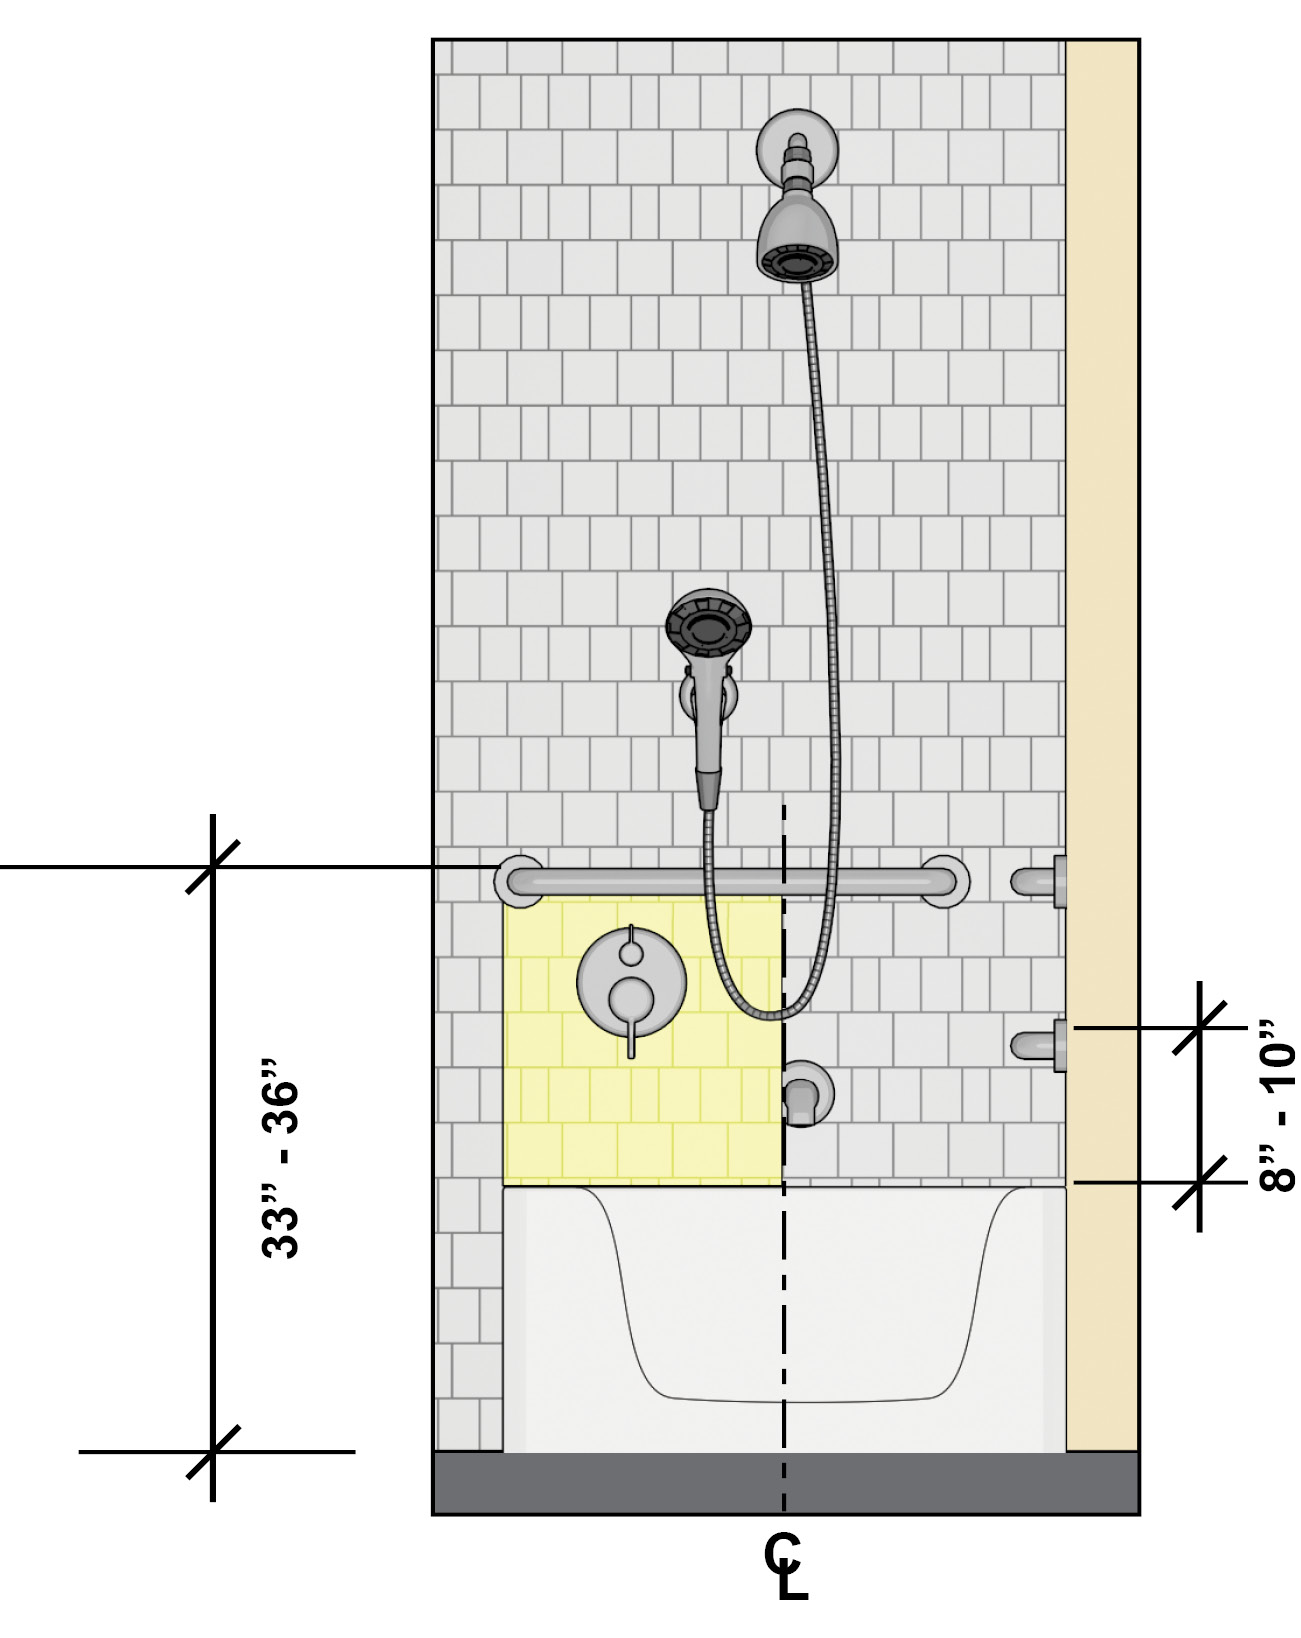 Grab bars at tub are 33 inches to 36 inches high measured to the top of the gripping surface. The lower parallel bar on the back wall is 8 inches to 10 inches above the tub rim. The controls are located on an end wall between the tub rim and grab bar and between the open side of the tub and the centerline of the tub width.